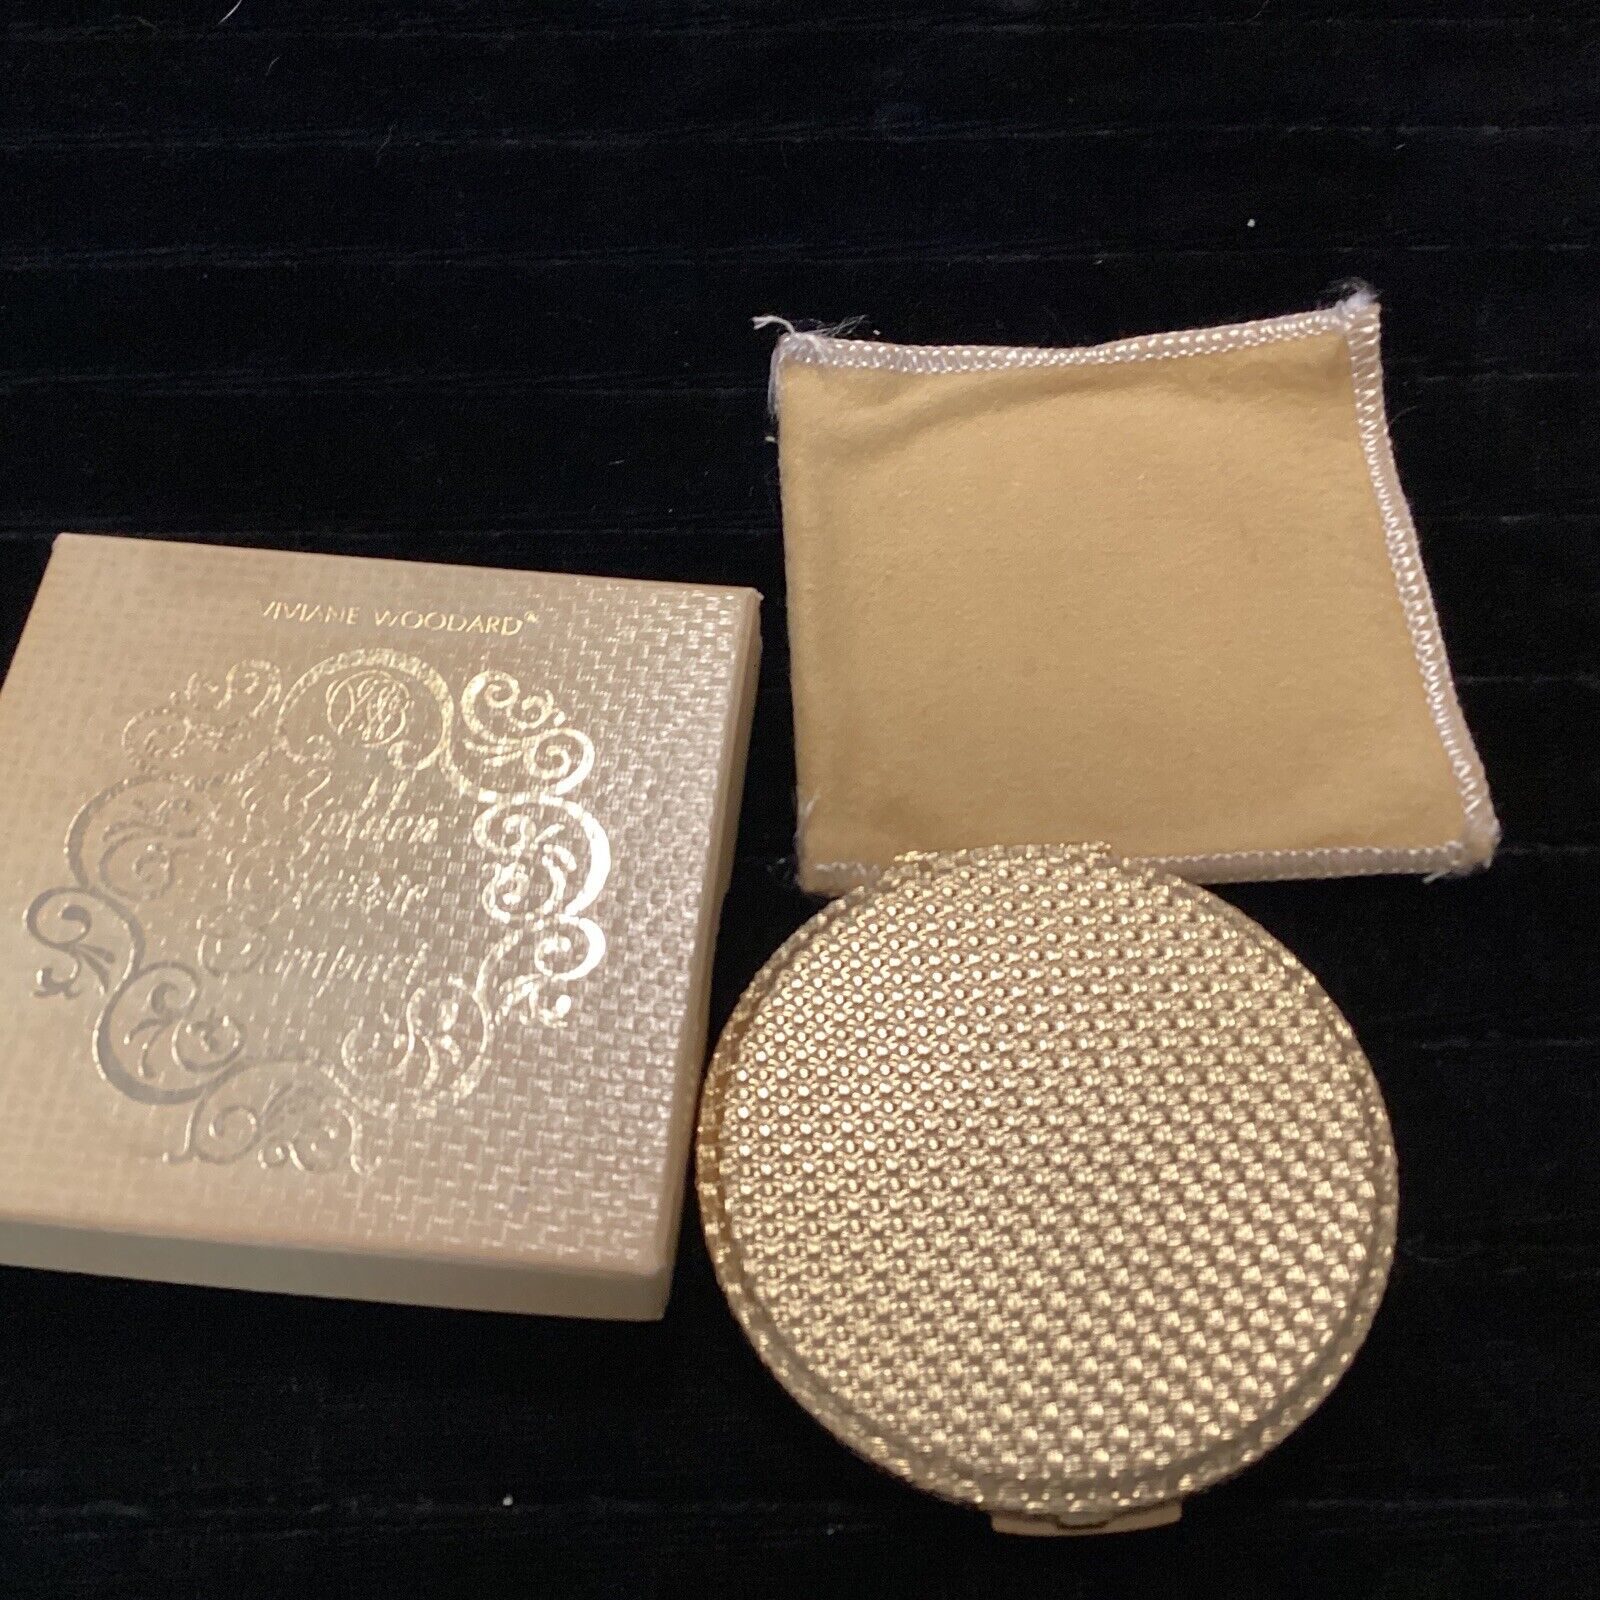 Viviane Woodward Vintage Yet New Powder Compact With Orig Box 